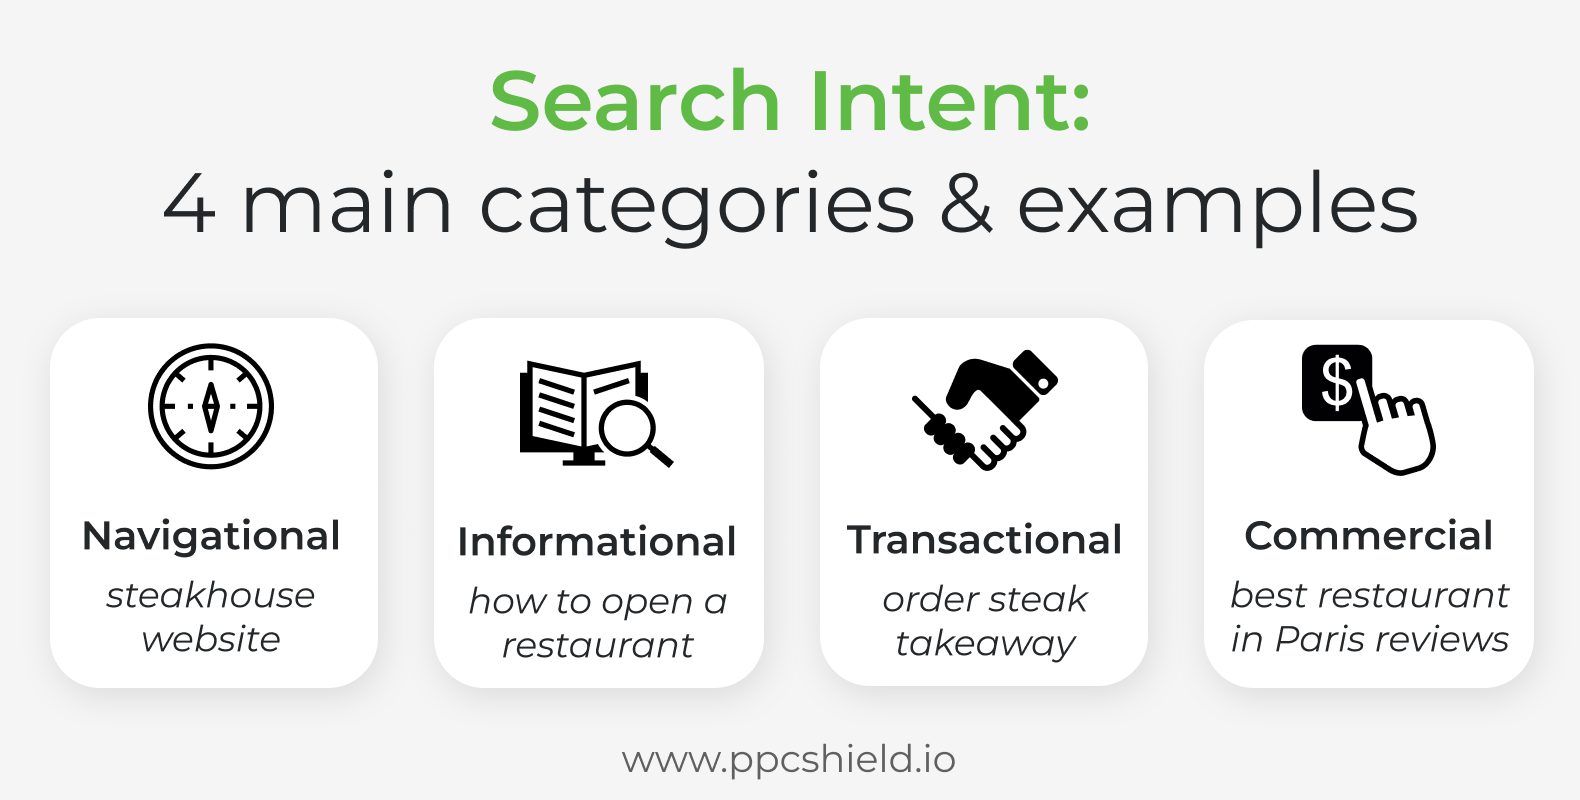 Types of Search Intent: Navigational, Informational, Transactional, Commercial